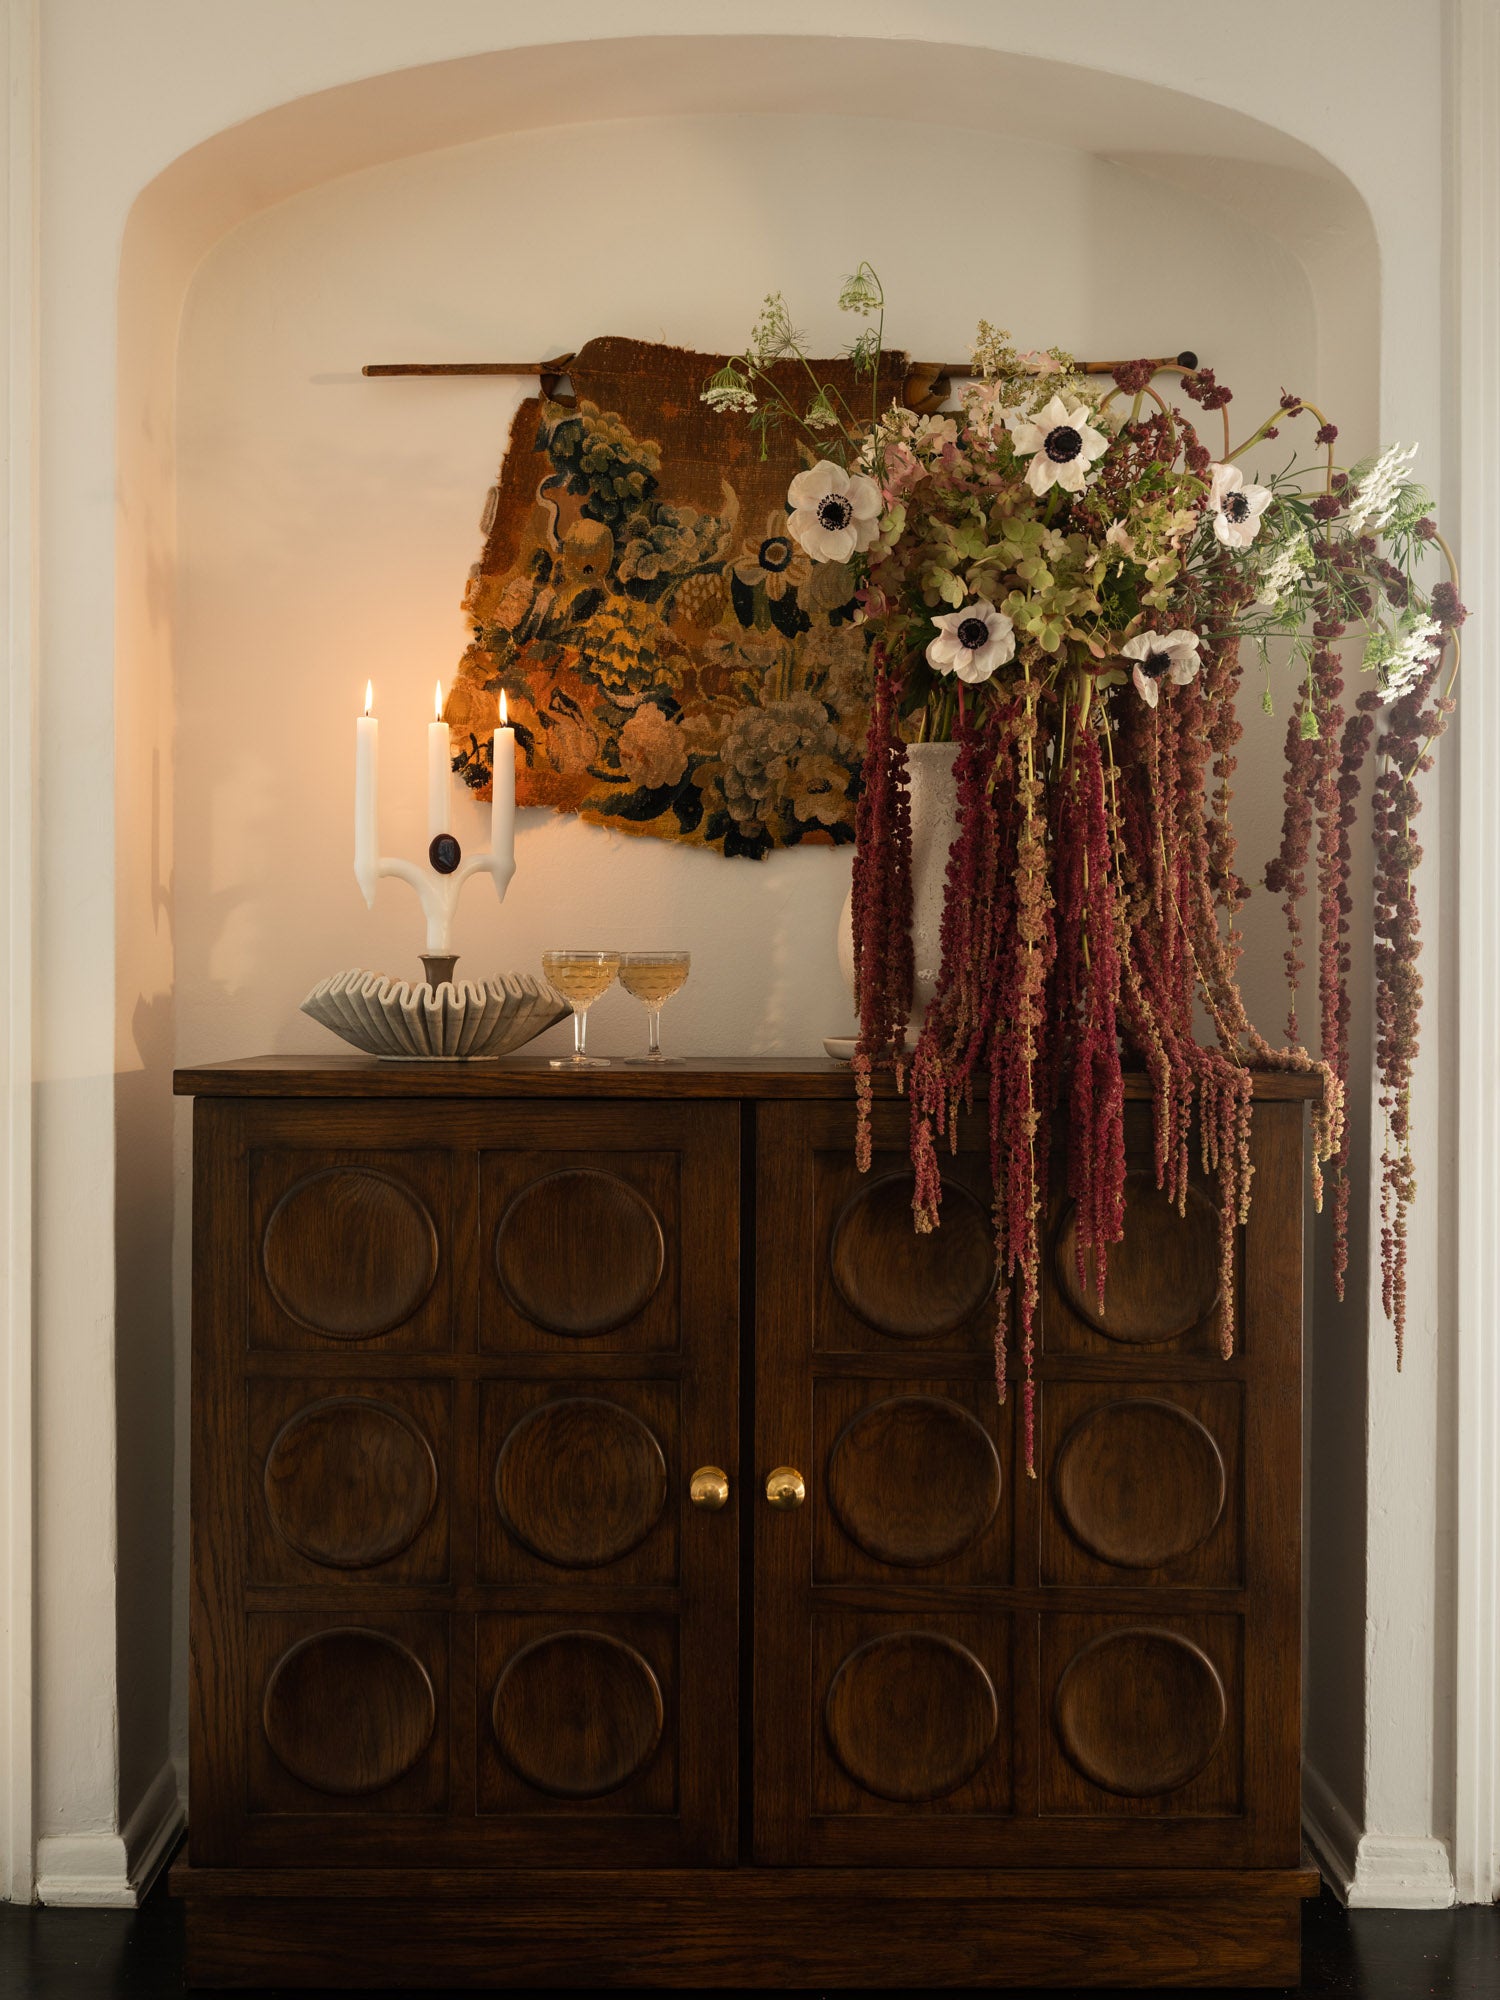 Bar cabinet with candles, champagne, and flowers